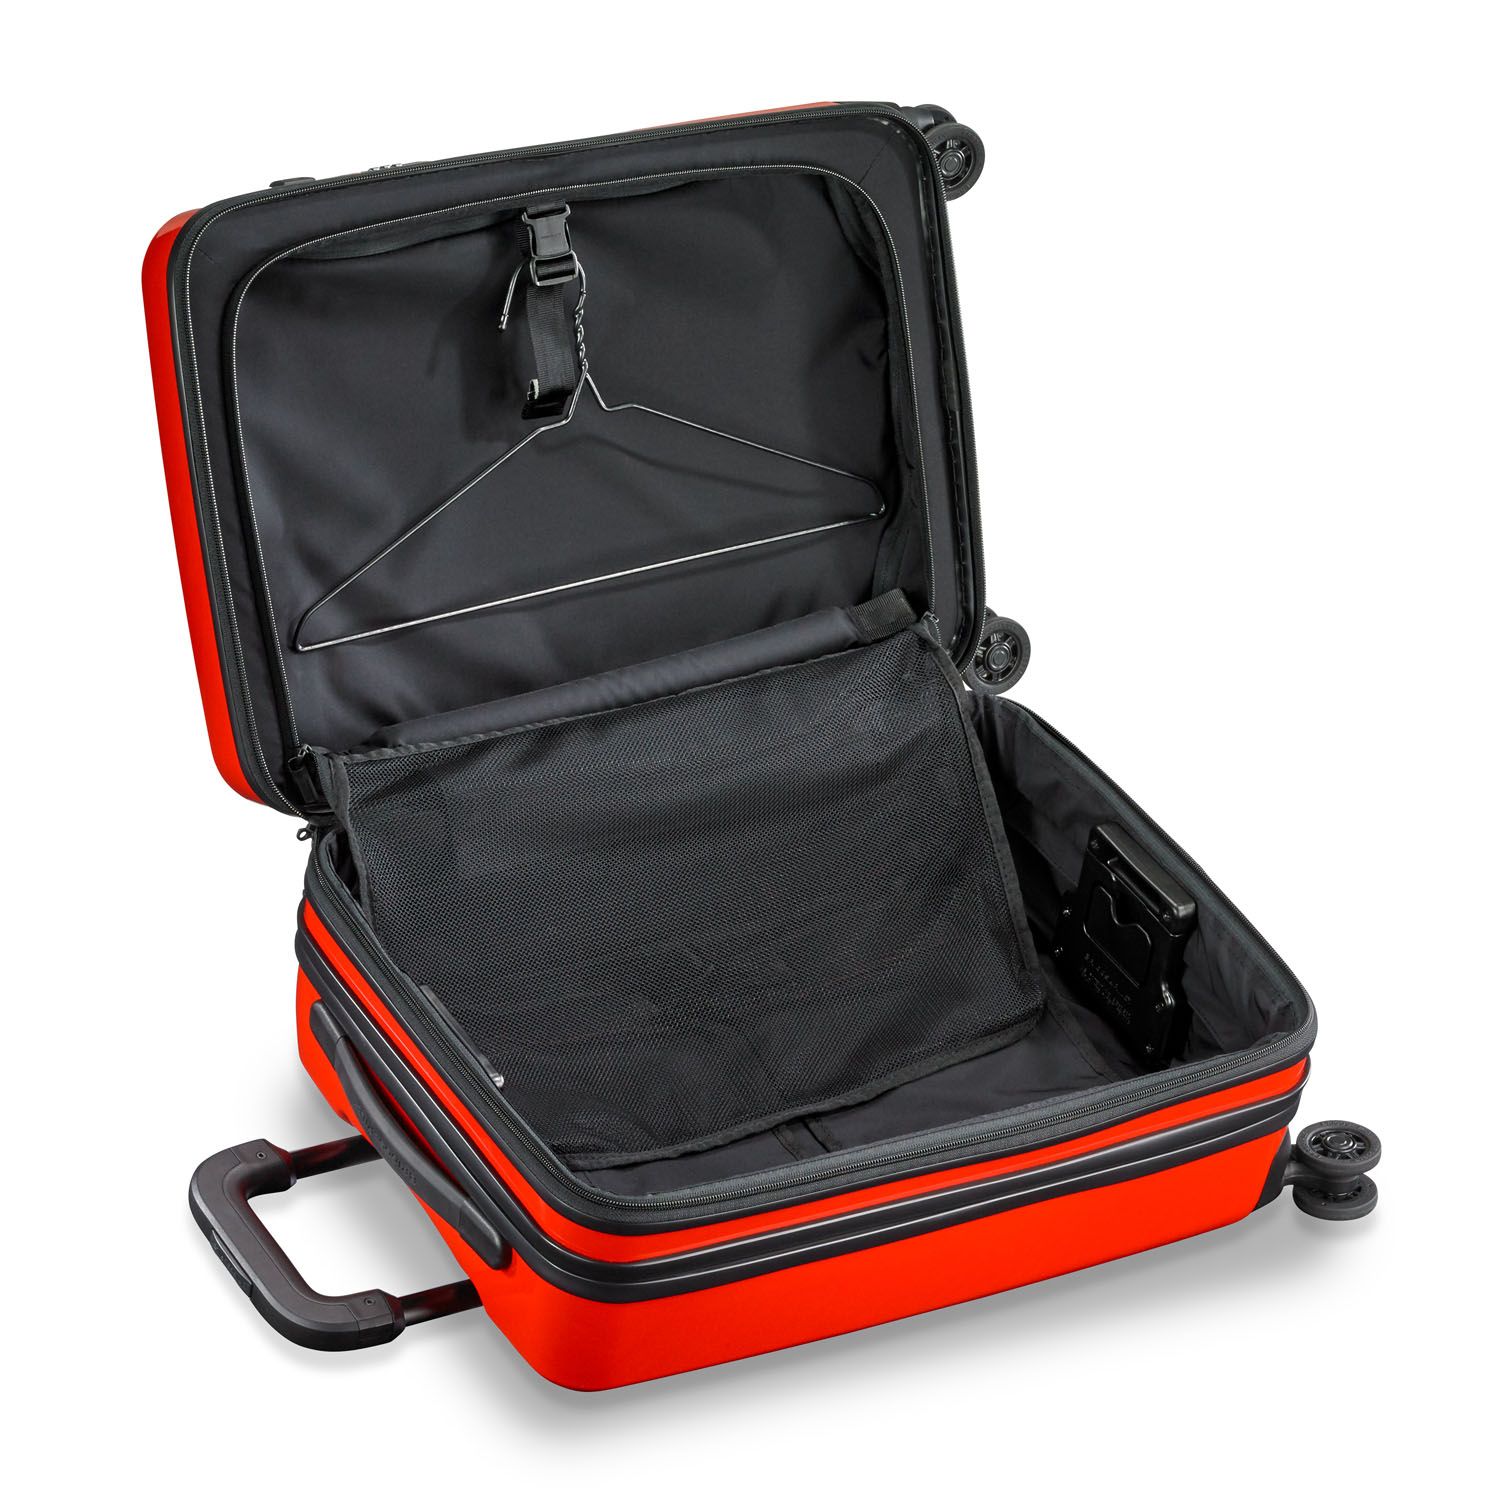 The Sympatico Domestic Carry-On Expandable Spinner: now in a perfect size for International travel. CX™ technology meets hardside luggage for the first time, letting you expand for 22% more space and then compress back to original size. Key features include: CX™ expansion-compression system increases packing capacity by 22%, then compresses back to original size to keep contents secure. Suiter in zip-around mesh panel on inside lid with speed buckle hanger holds 1 suit or garment or 1-2 shirts and cinches them securely in place. Outsider® handle provides greater interior capacity and a smooth surface for packing so clothes arrive wrinkle-free. Built-in TSA-friendly combination lock secures contents, letting agents safely access your bag; no more cut cable locks. 3-layer, 100% virgin Makrolon® polycarbonate material is high-strength, lightweight, and provides elasticity and resiliency.